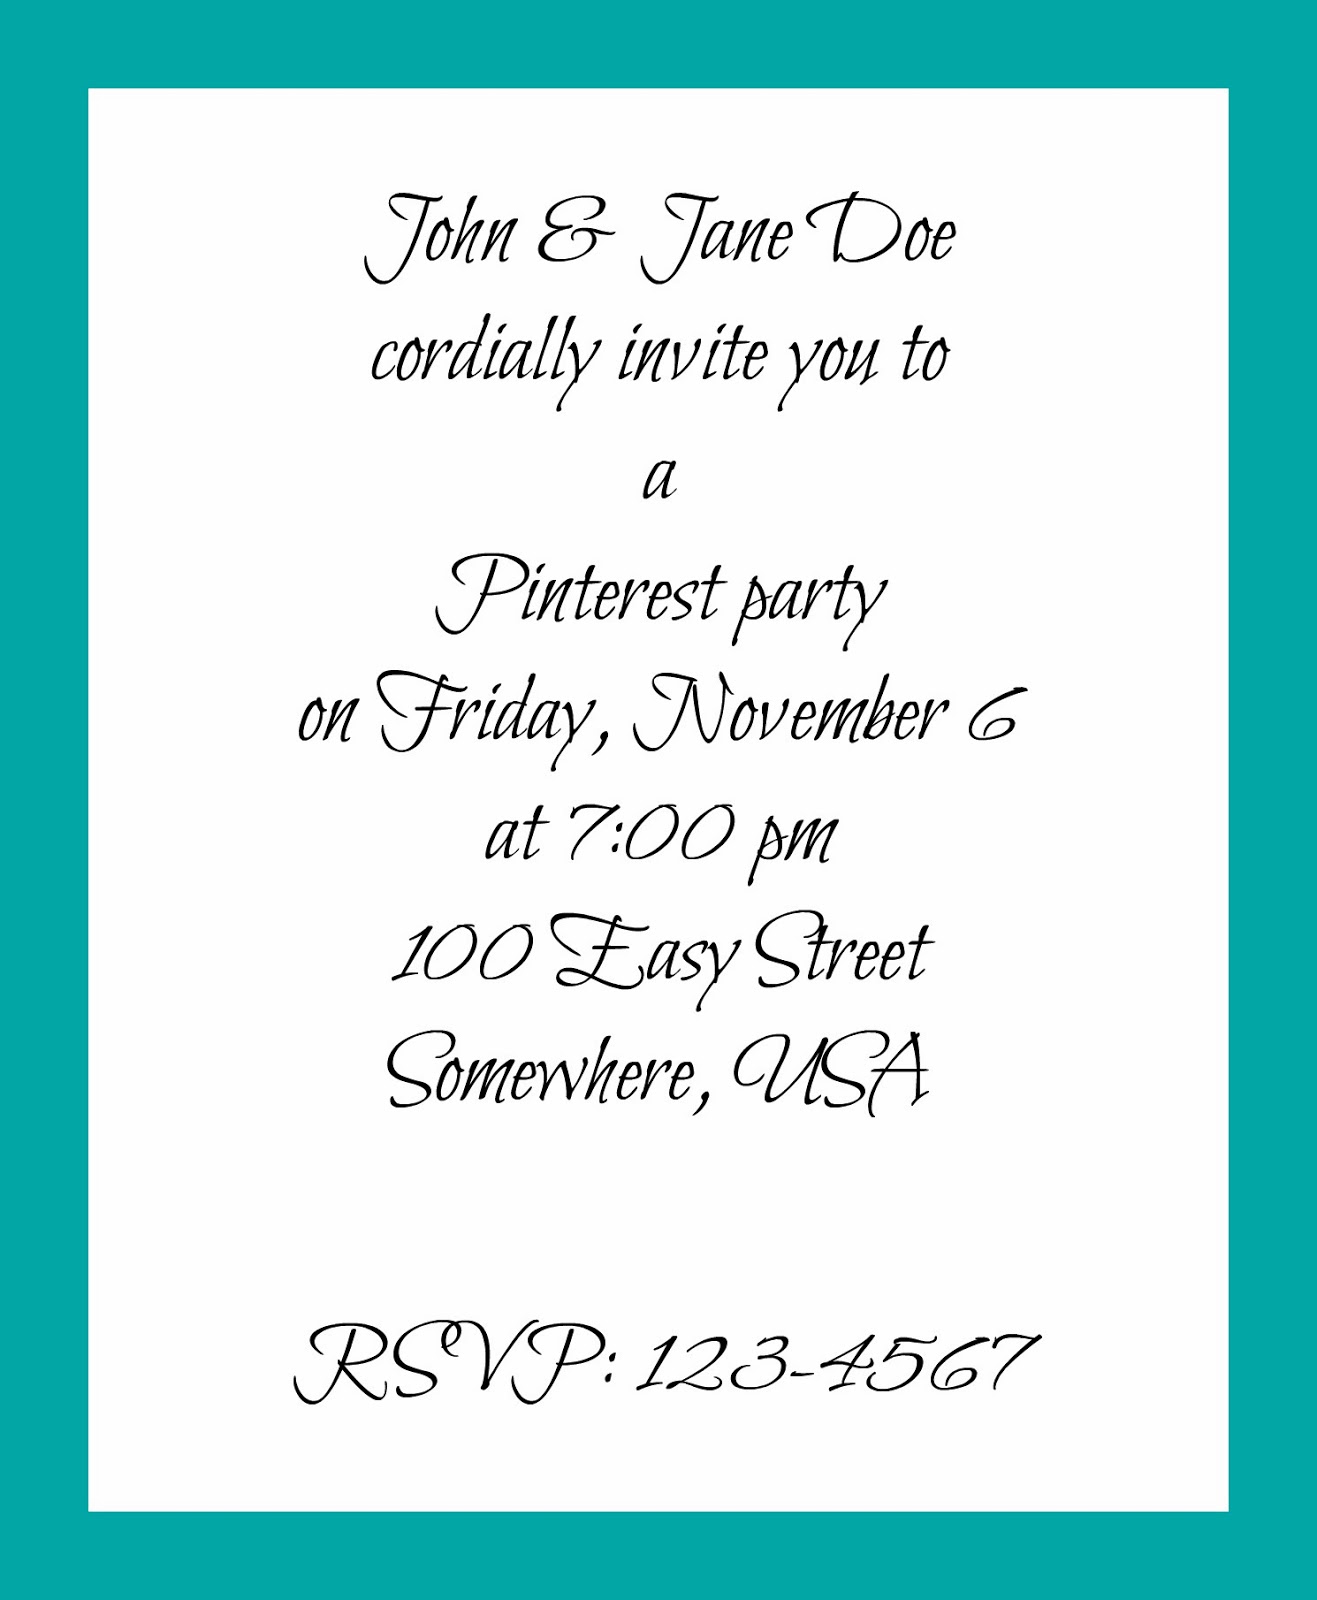  Sew} Daily: Hostessing: How to Write an Invitation {+ free printables